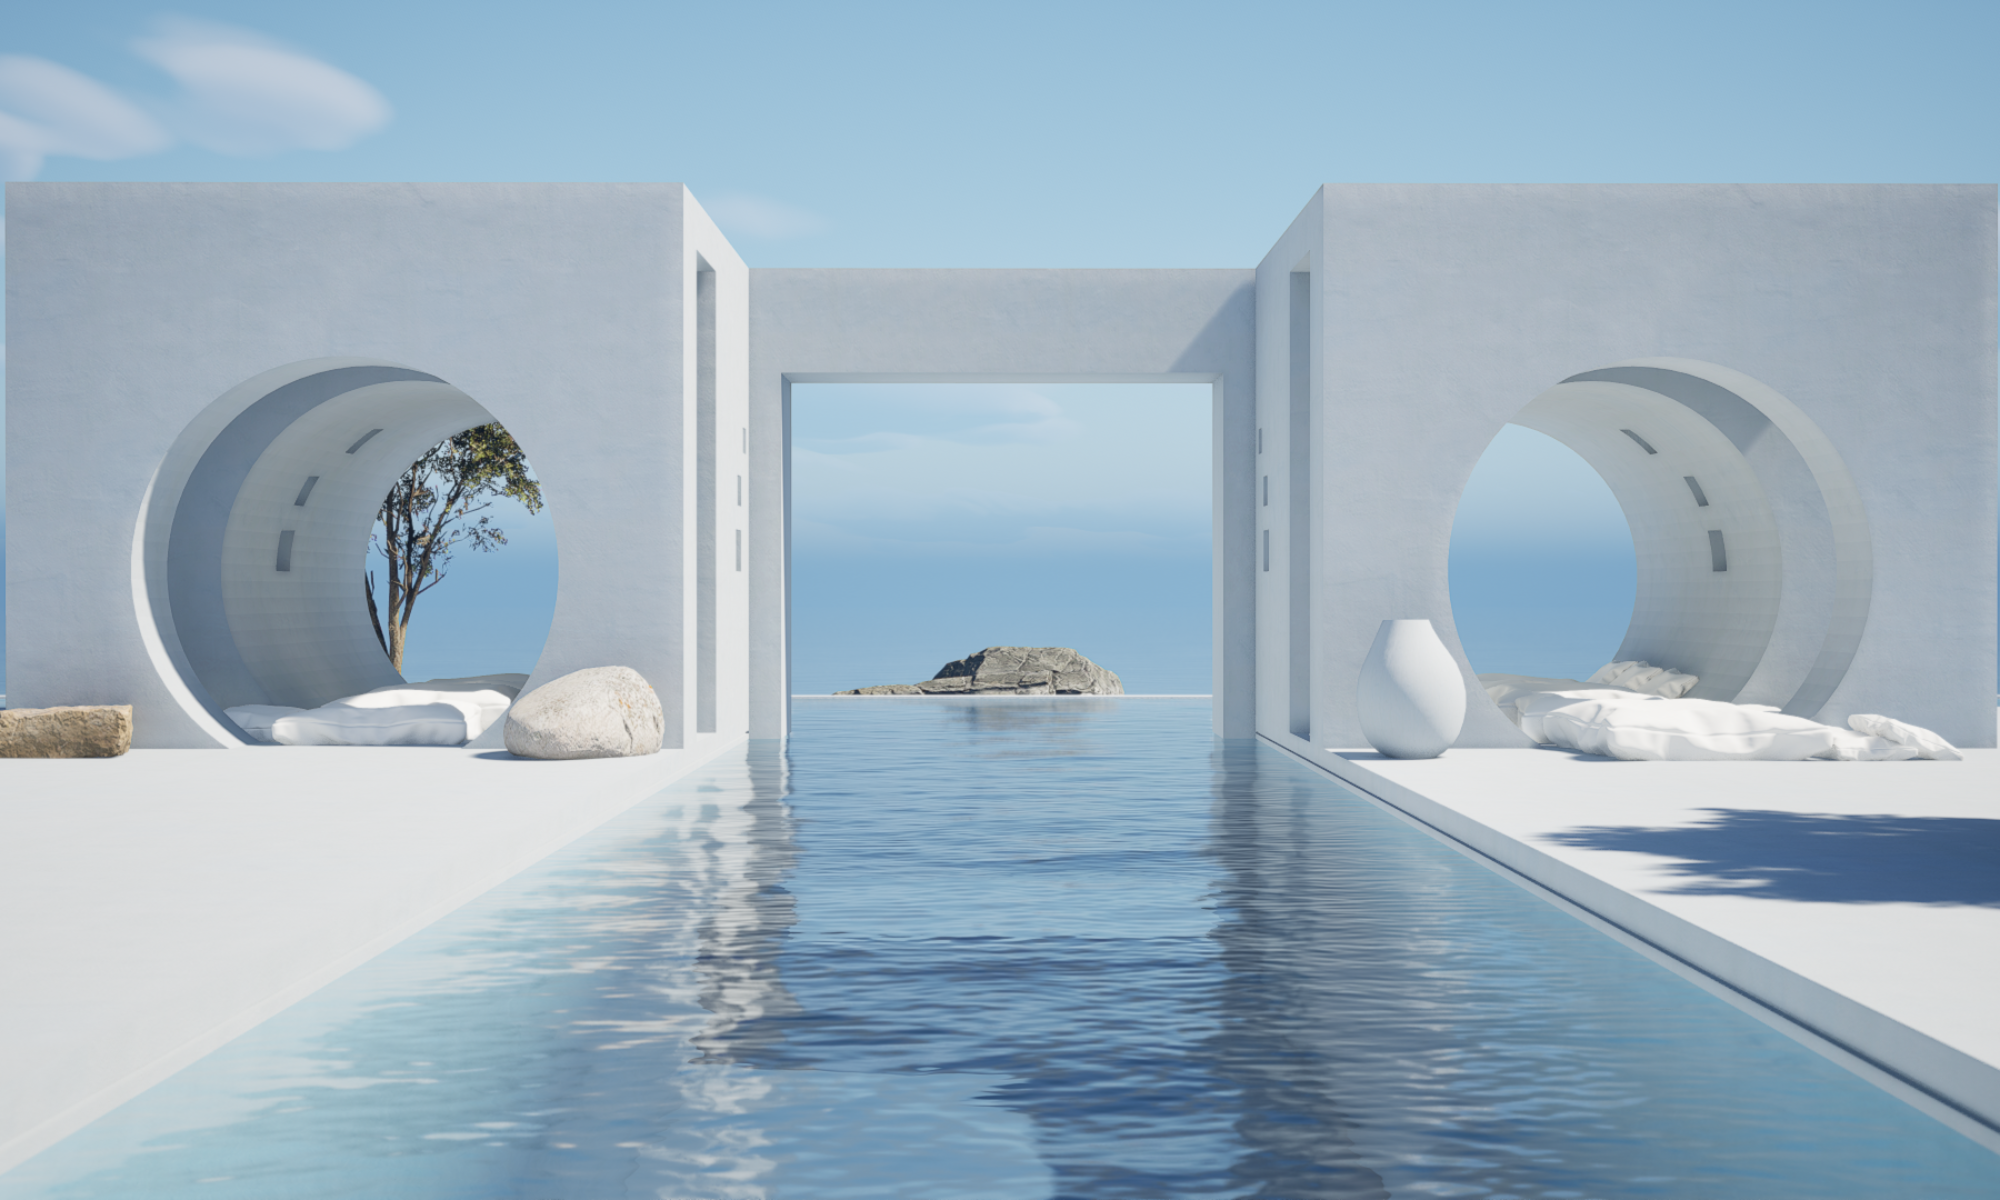 villa greece with a long dream pool, mediterranean paradise, abstract vases, architecture, sea on background, circles design openings, and rocks lay around the pavement